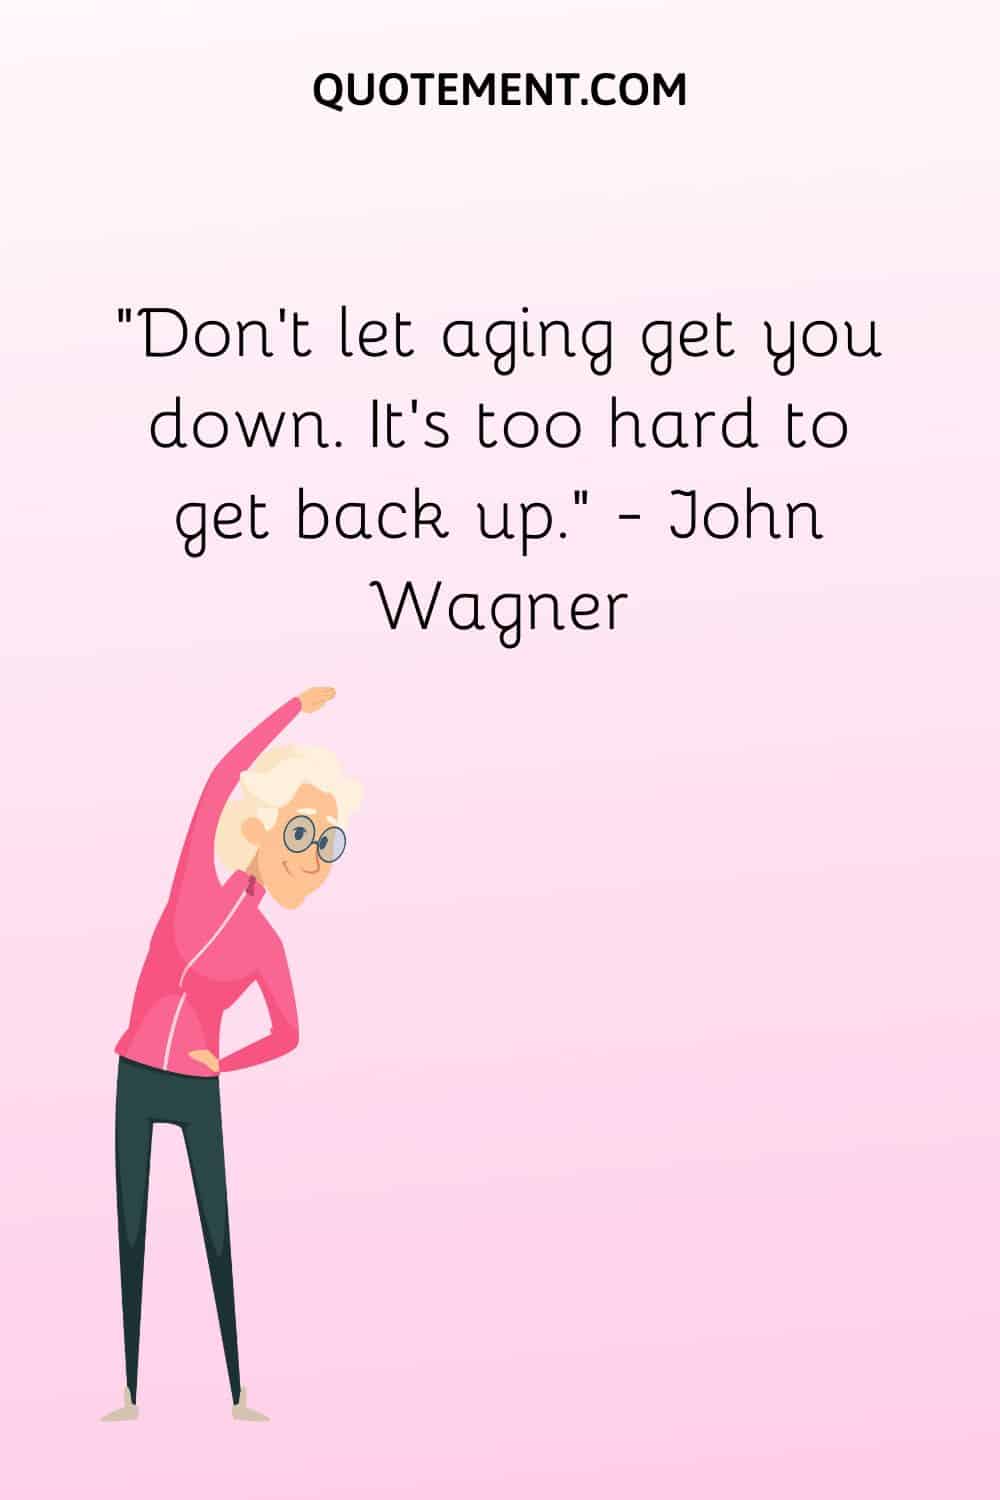 90 Inspiring & Funny Quotes About Aging Gracefully